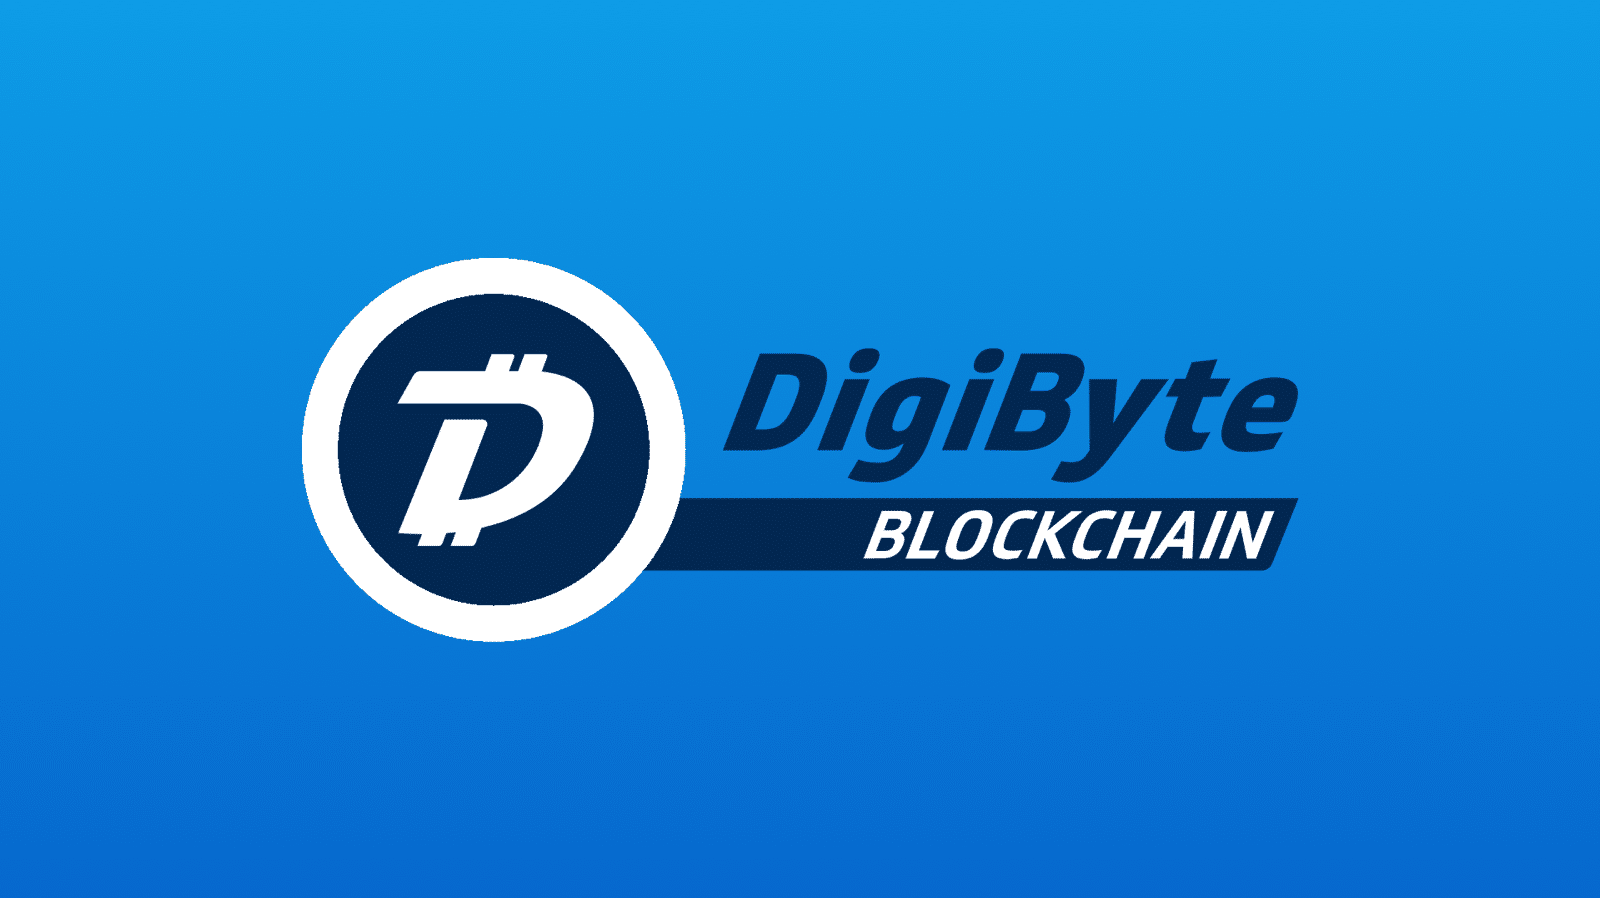 Under Attack? Study Shows 40% of Digibyte (DGB) Network Already Compromised